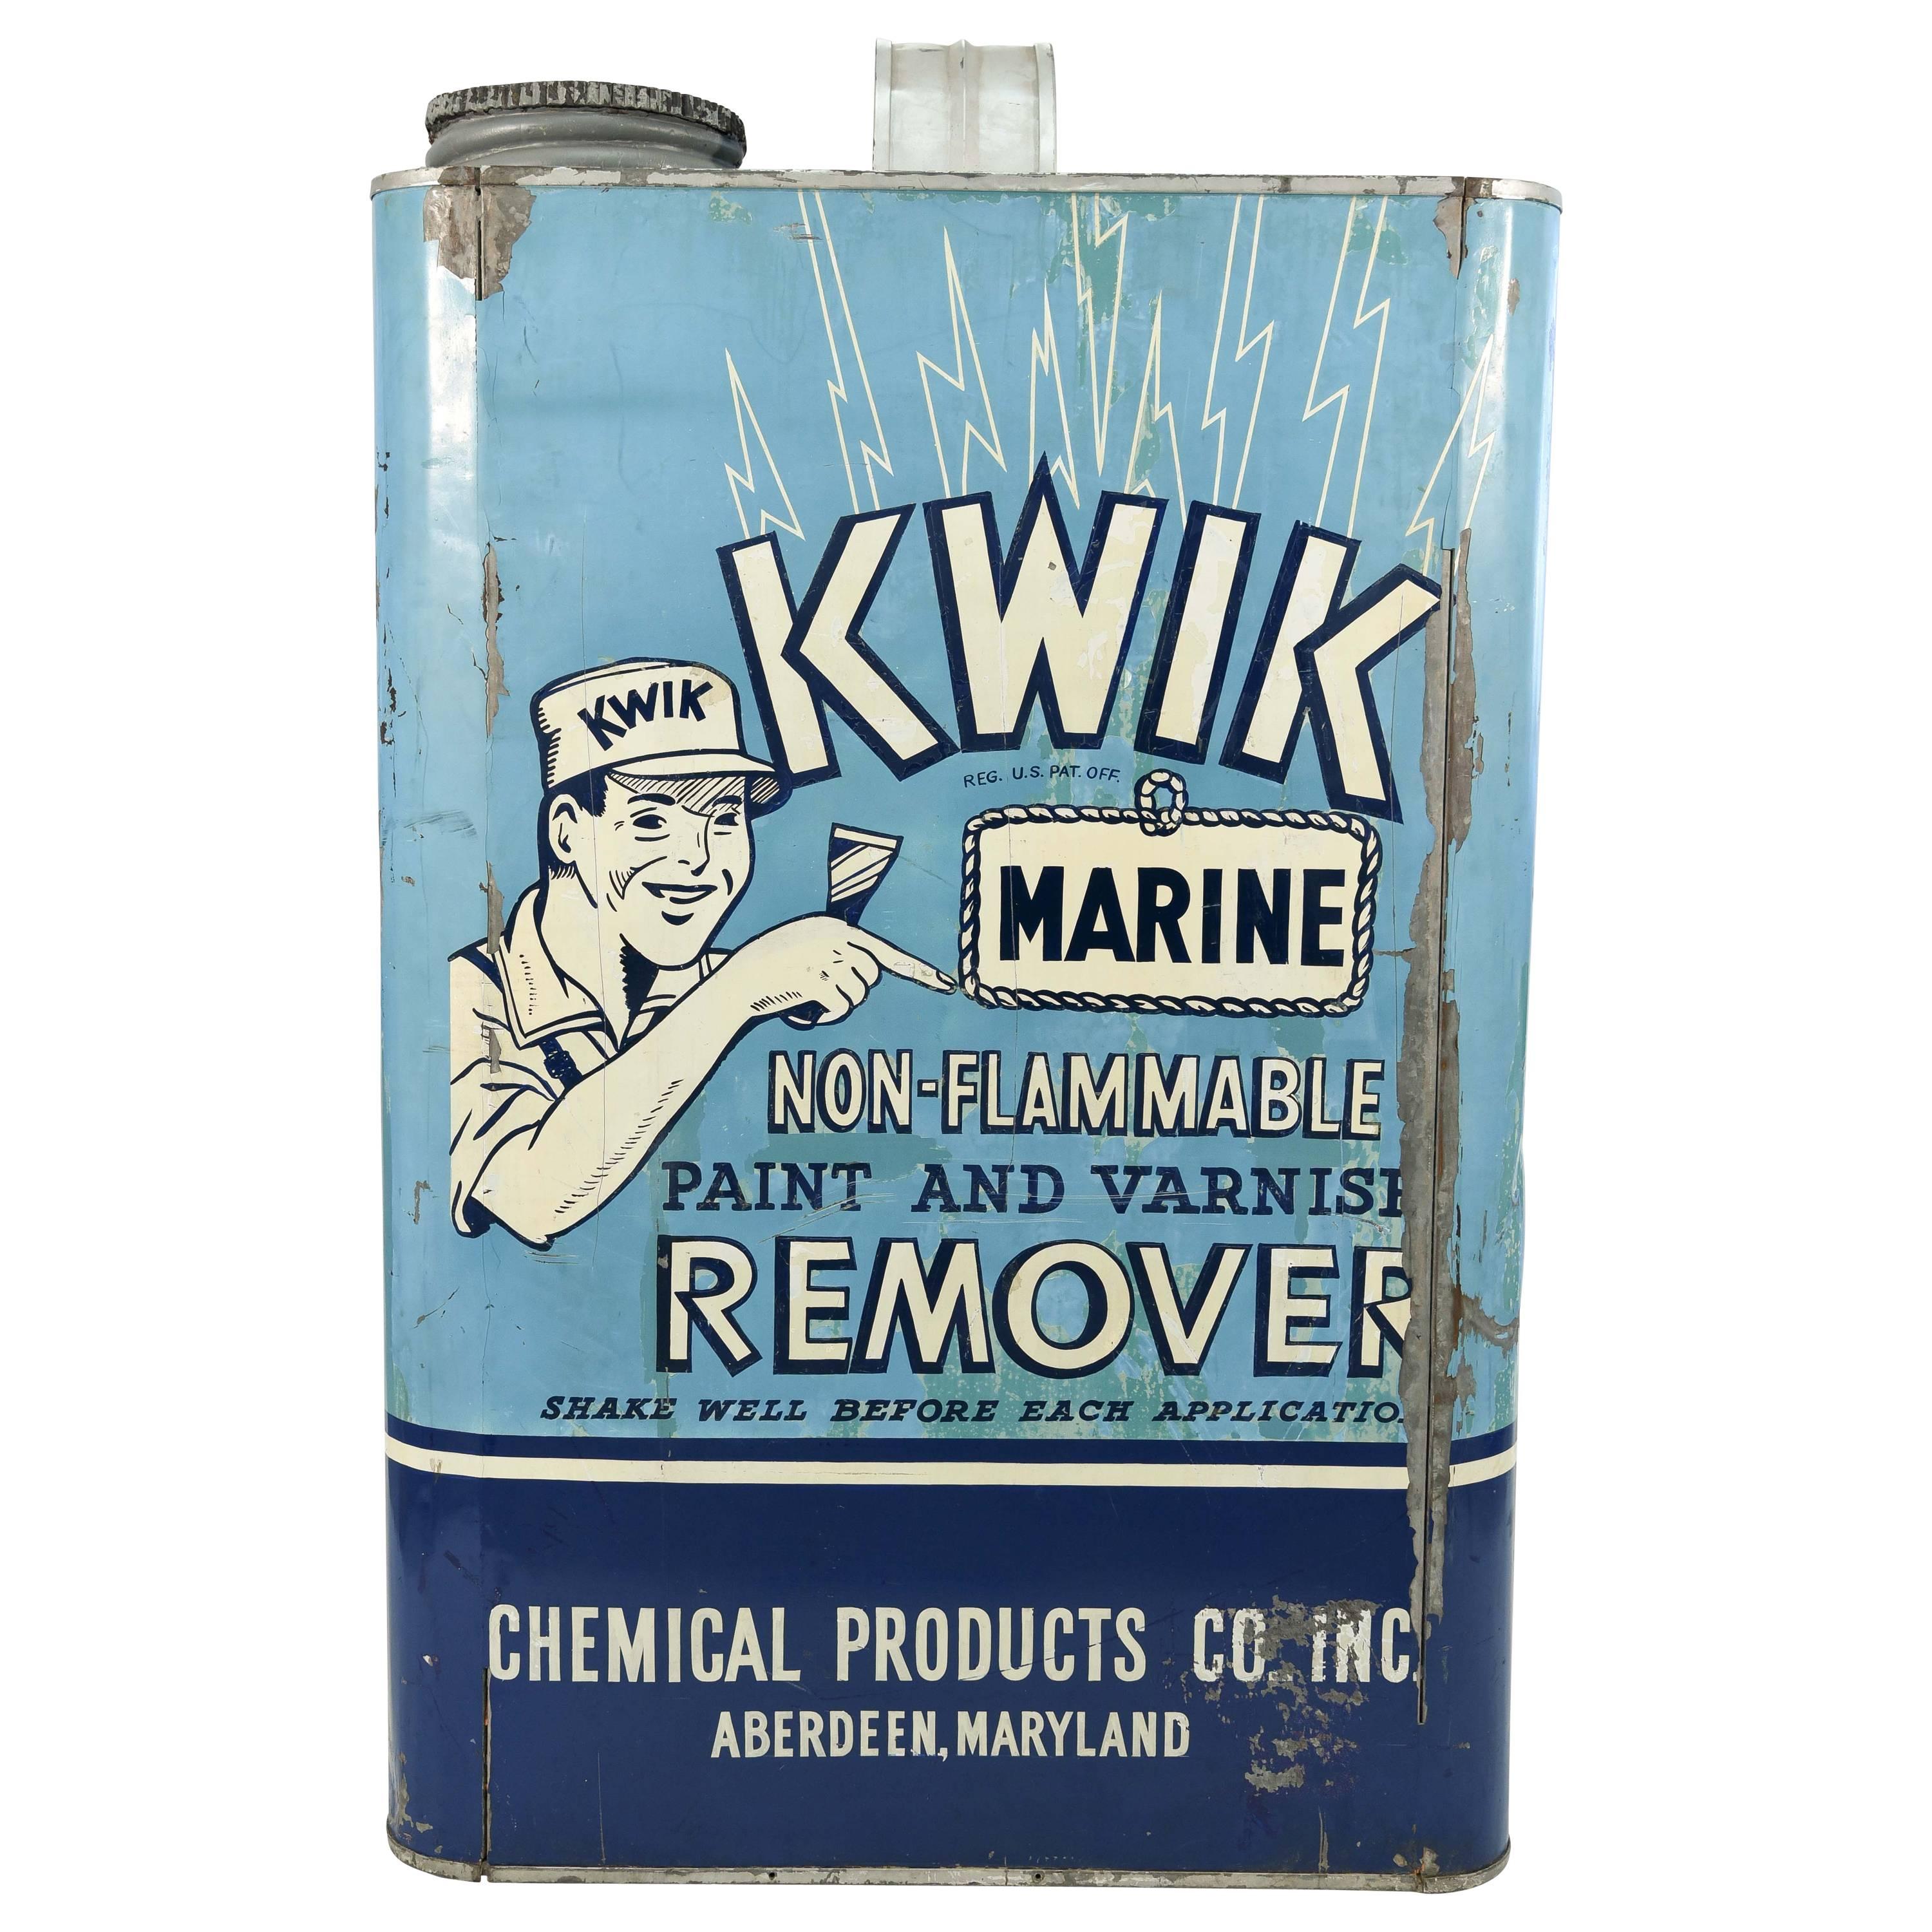 Giant Advertising Trade Sign of a Kwik Paint Remover Can